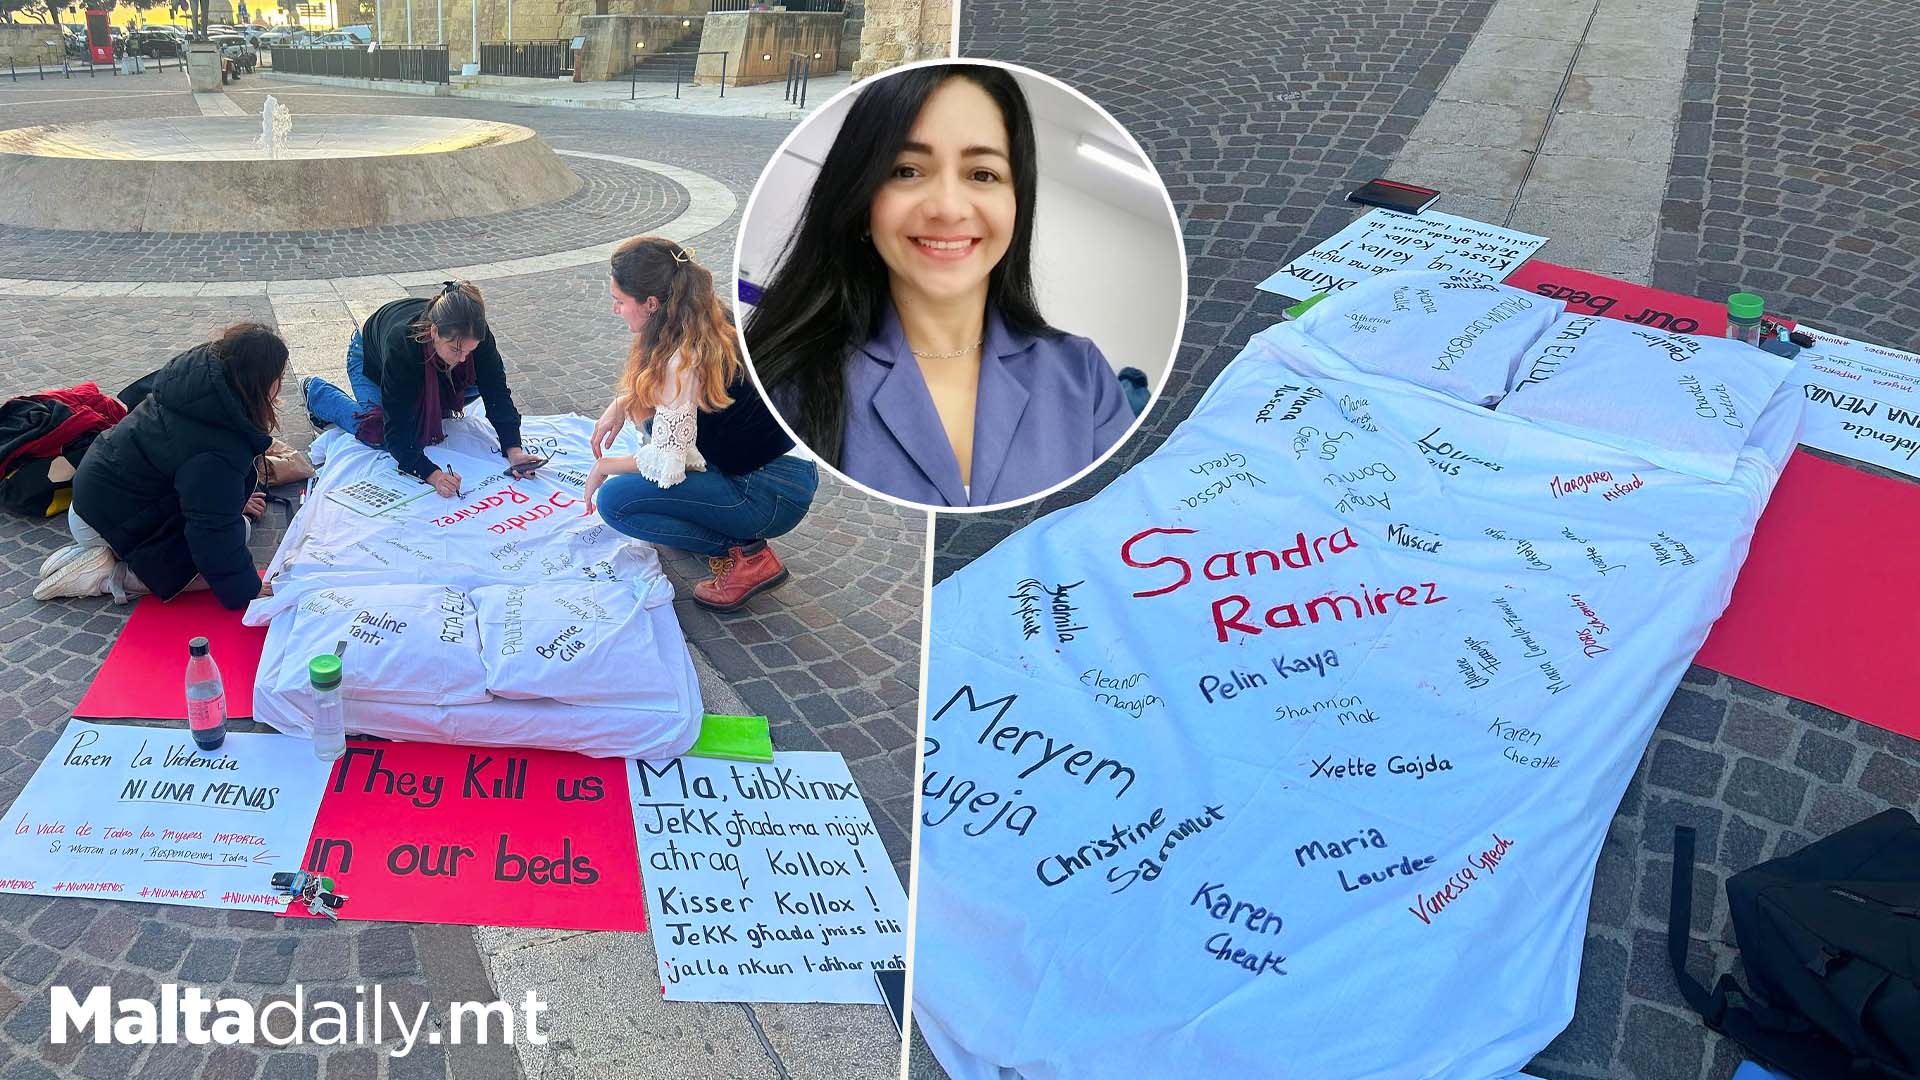 Bed Installation Outside Castille Remembers Femicide Victims